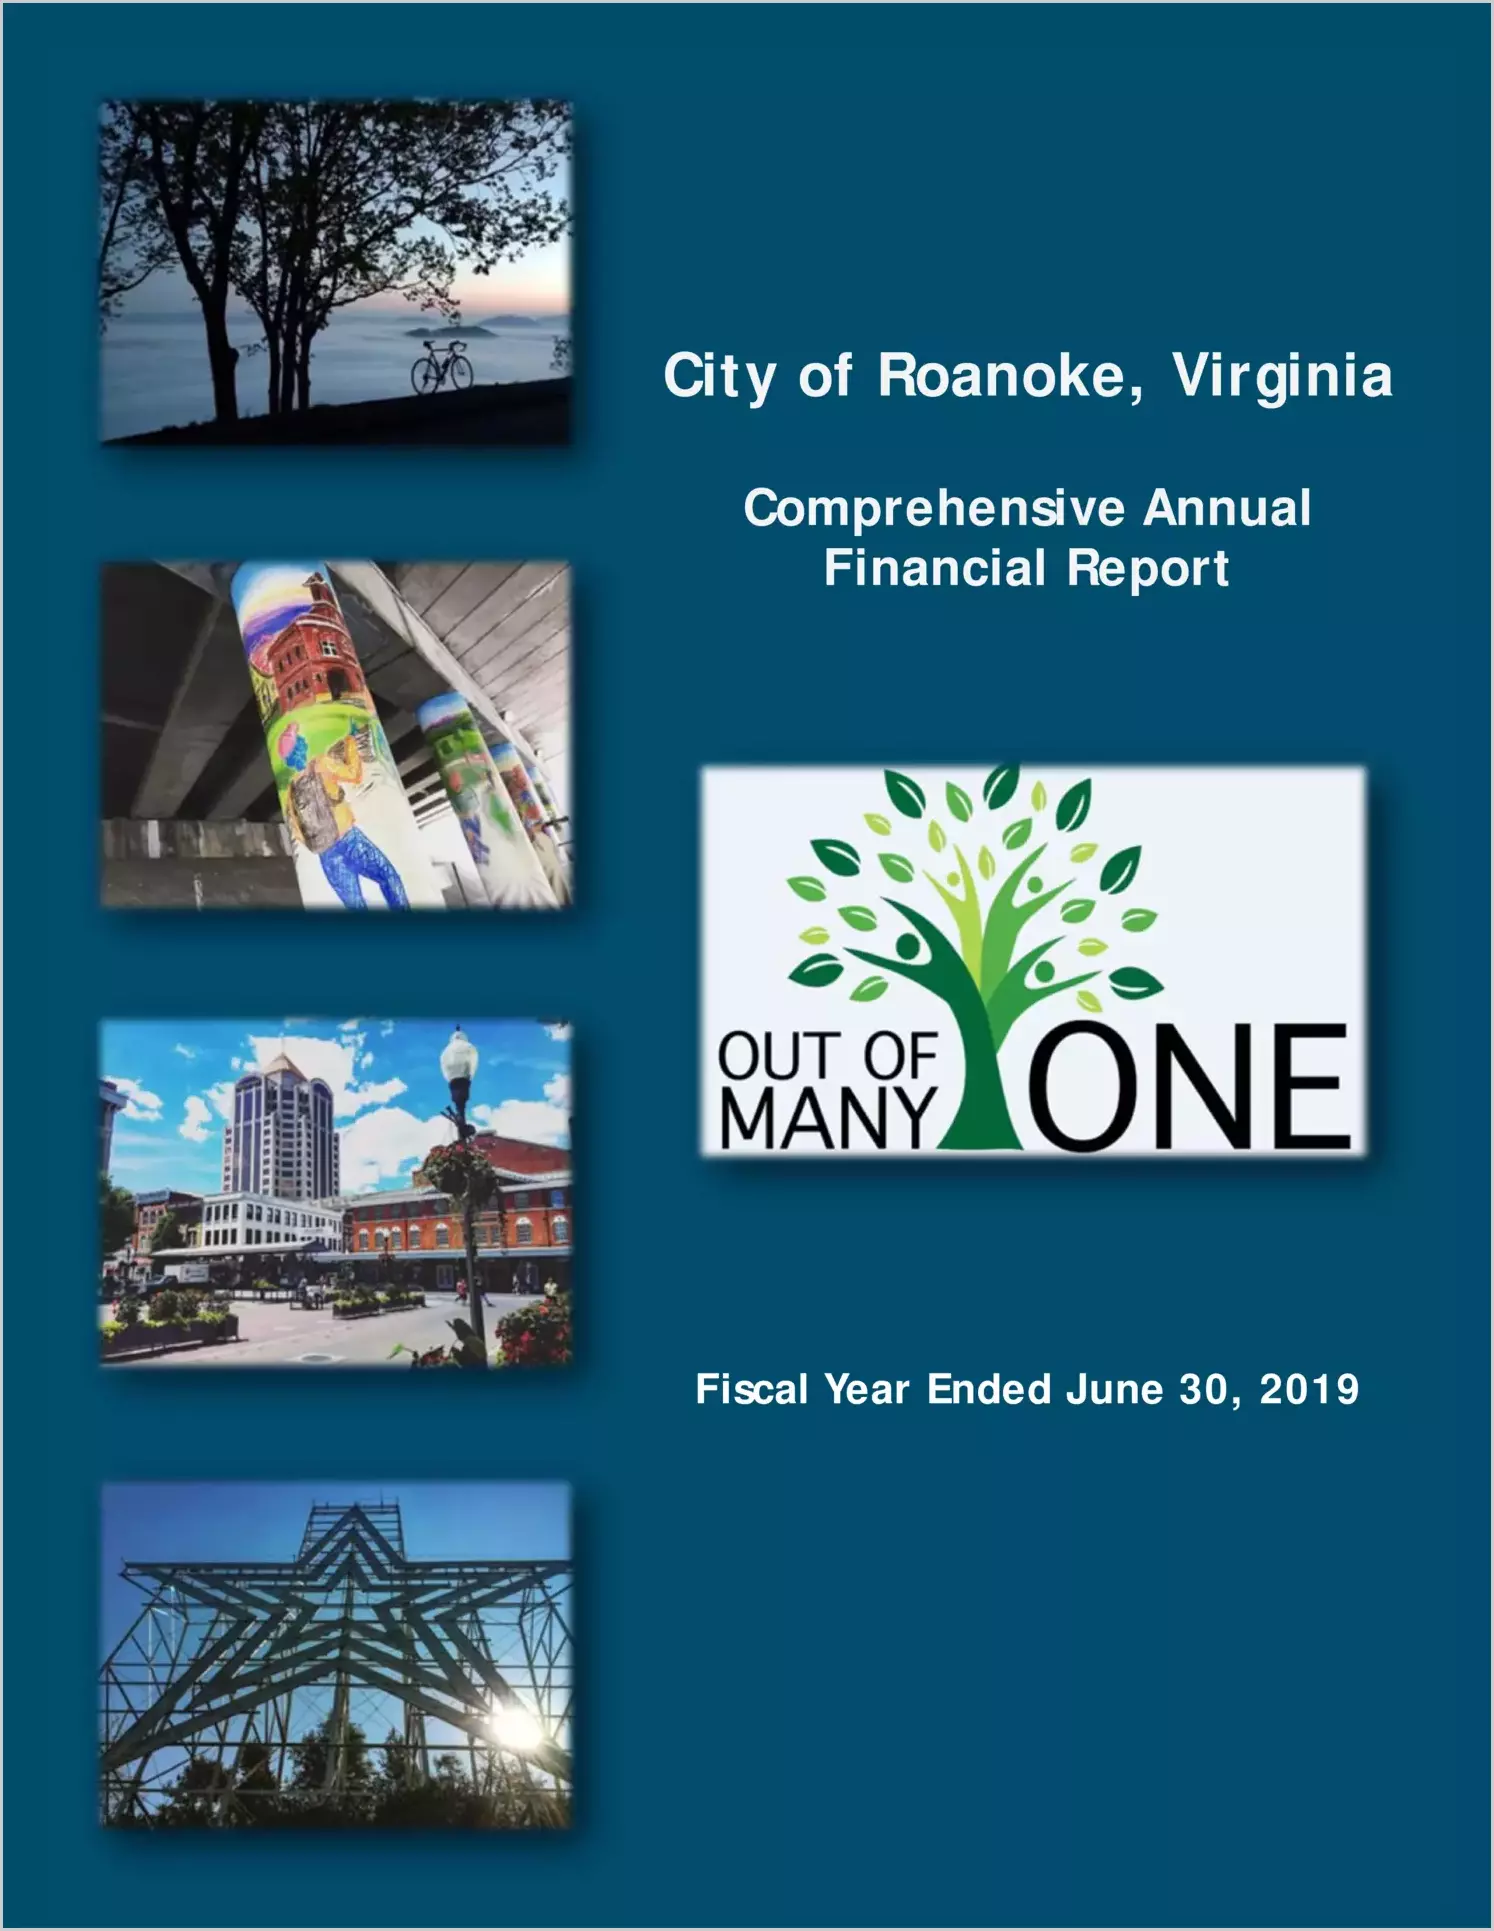 2019 Annual Financial Report for City of Roanoke